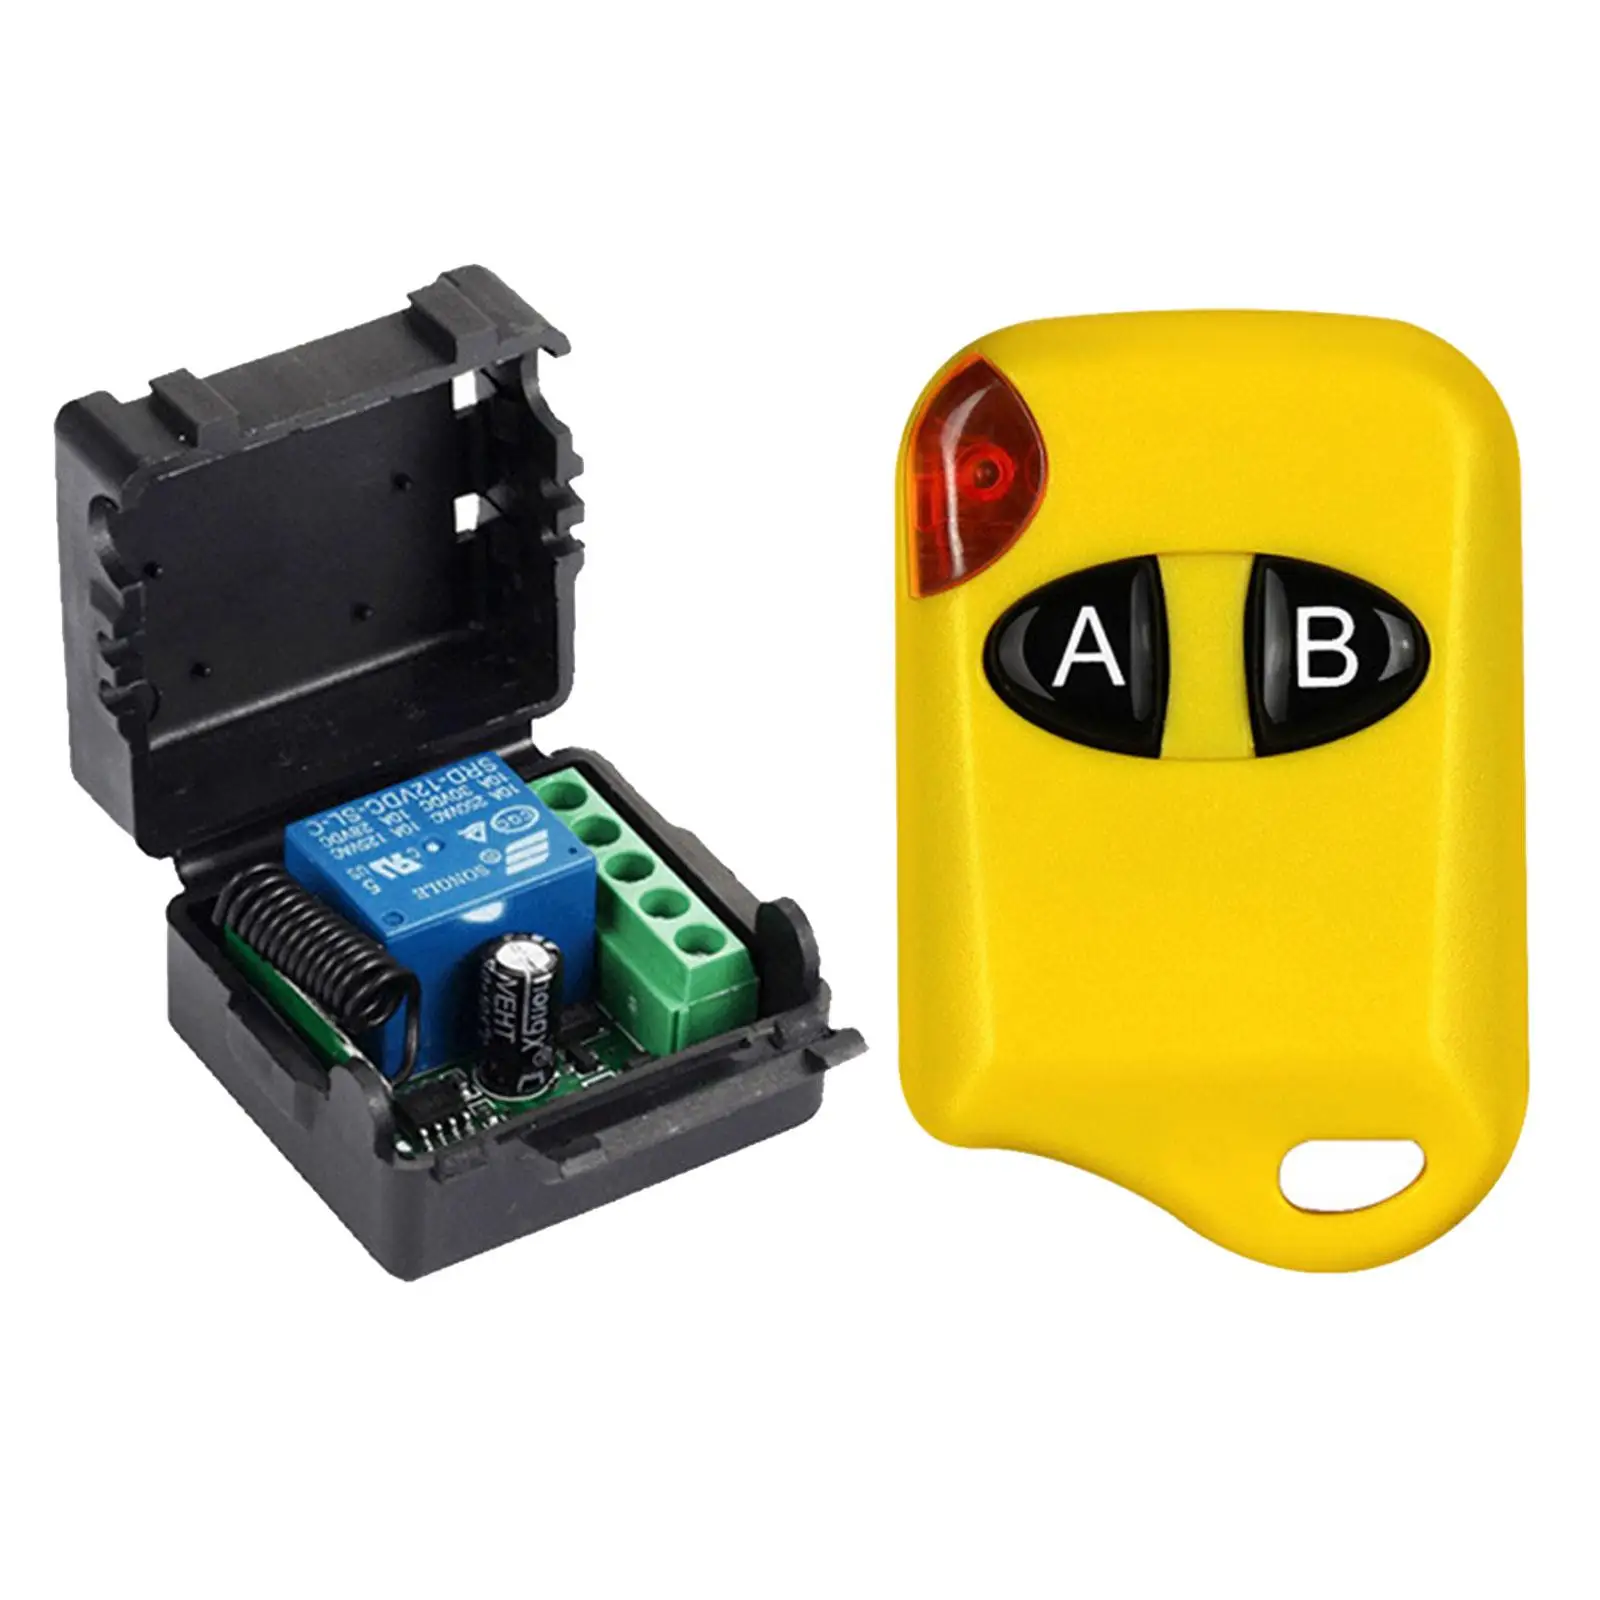 Remote Control Switch with Remote Contol for Electrical Equipment Lighting